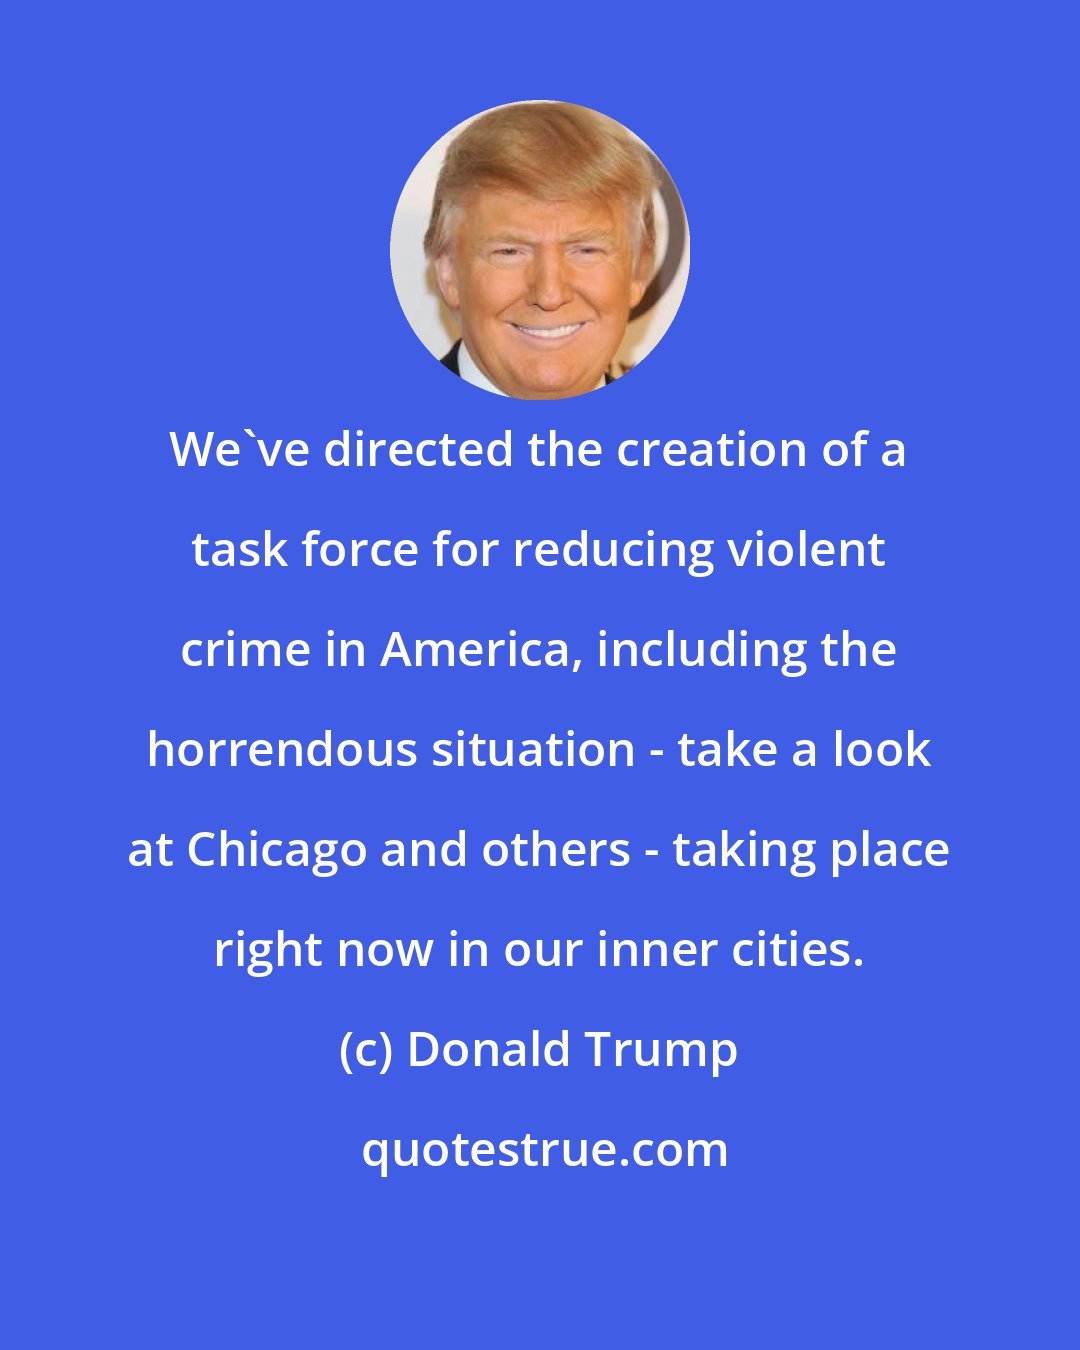 Donald Trump: We've directed the creation of a task force for reducing violent crime in America, including the horrendous situation - take a look at Chicago and others - taking place right now in our inner cities.